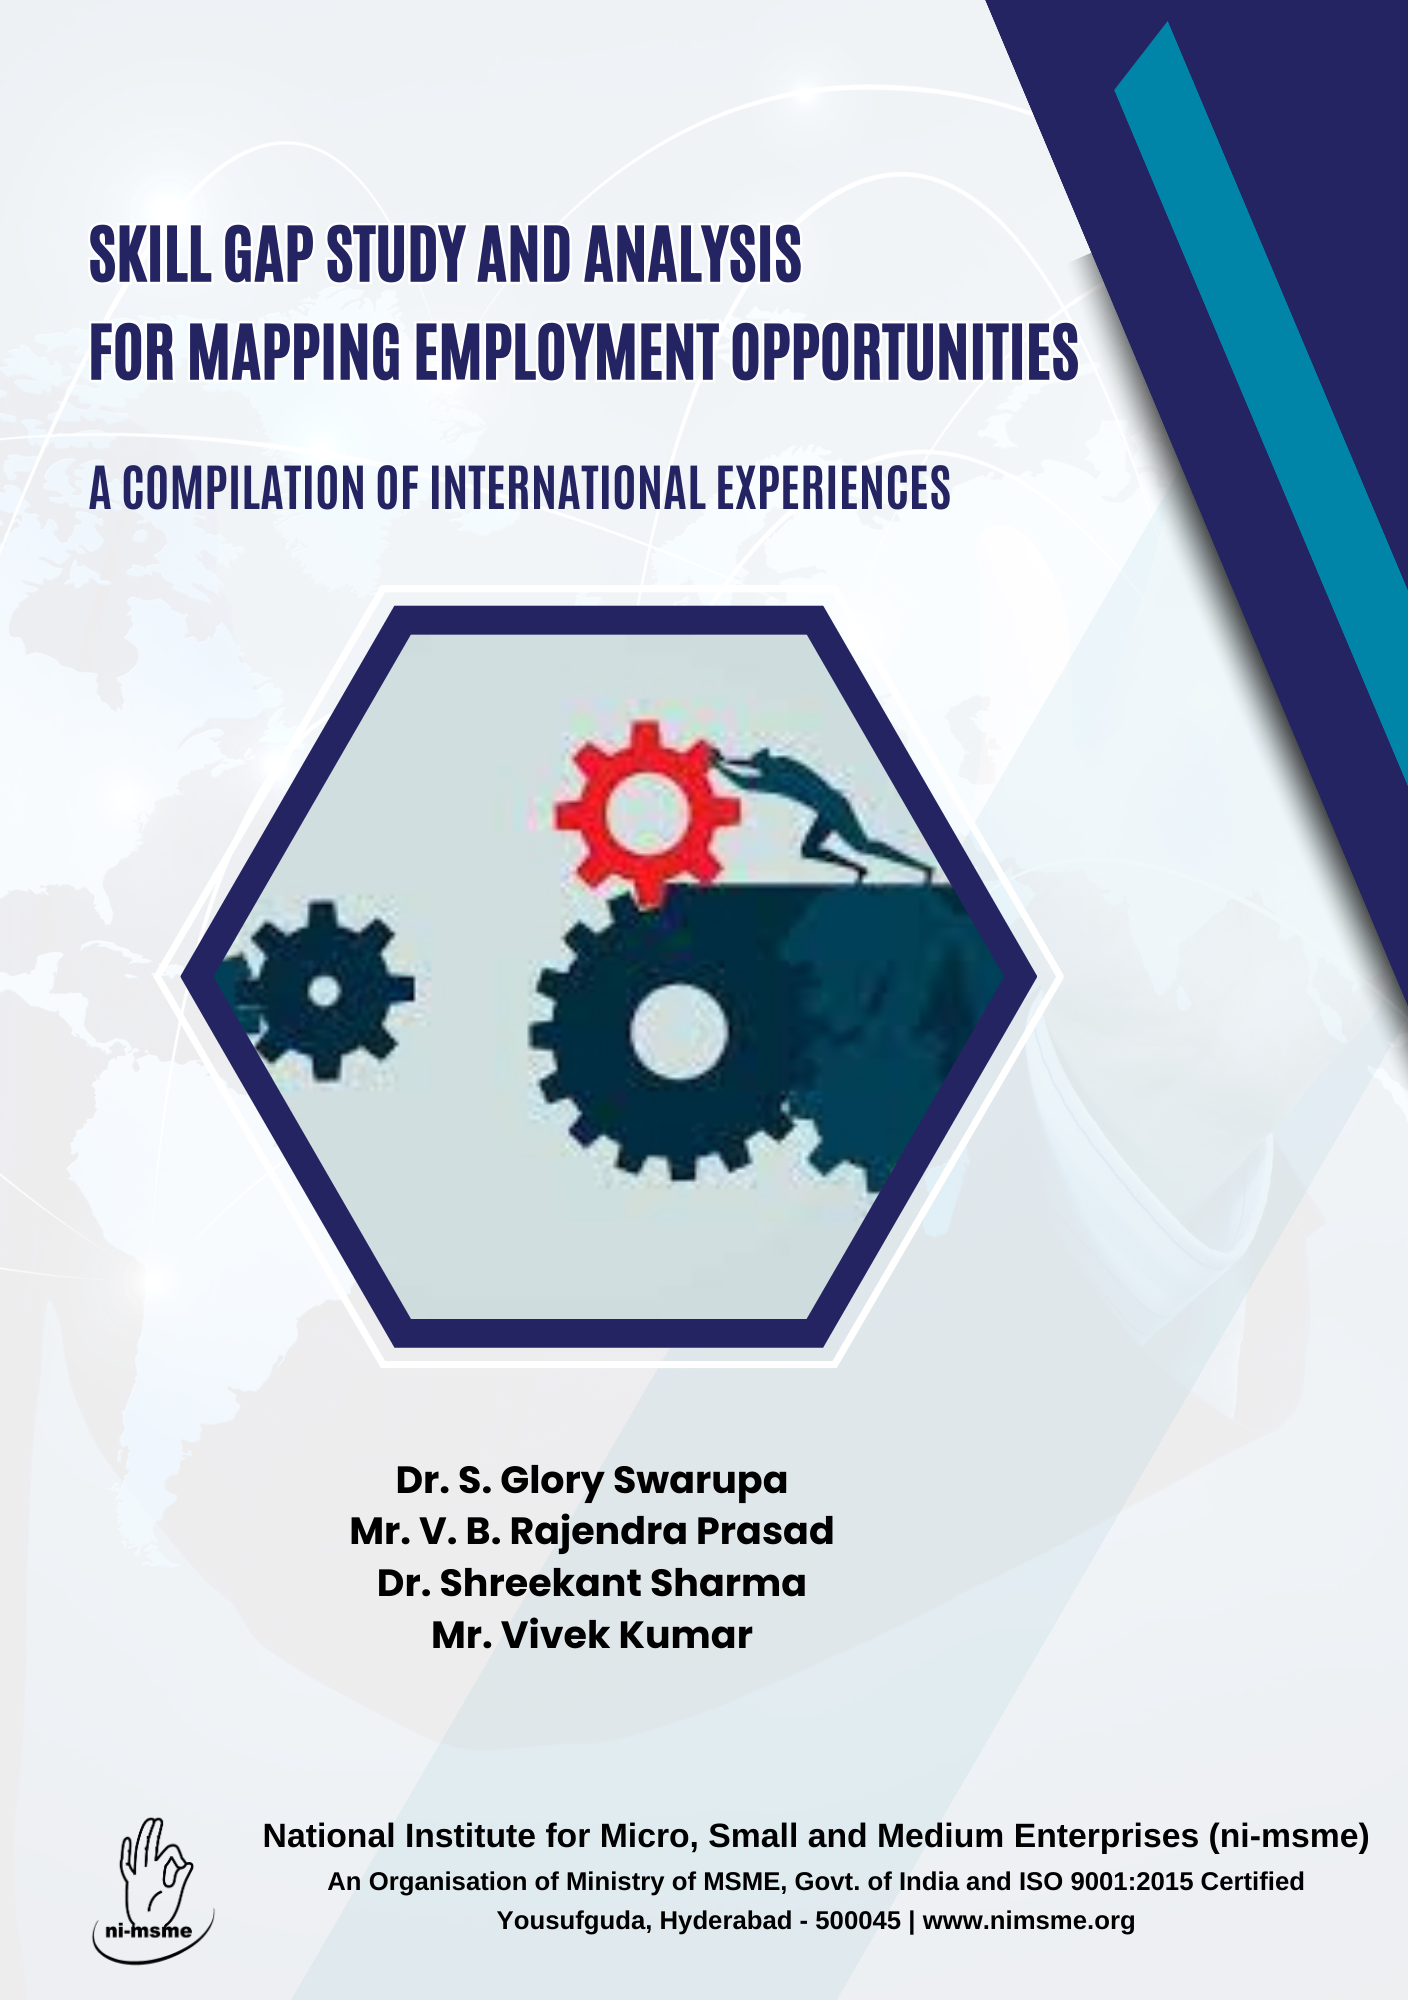 Skill Gap Study and Analysis for Mapping Employment Opportunities